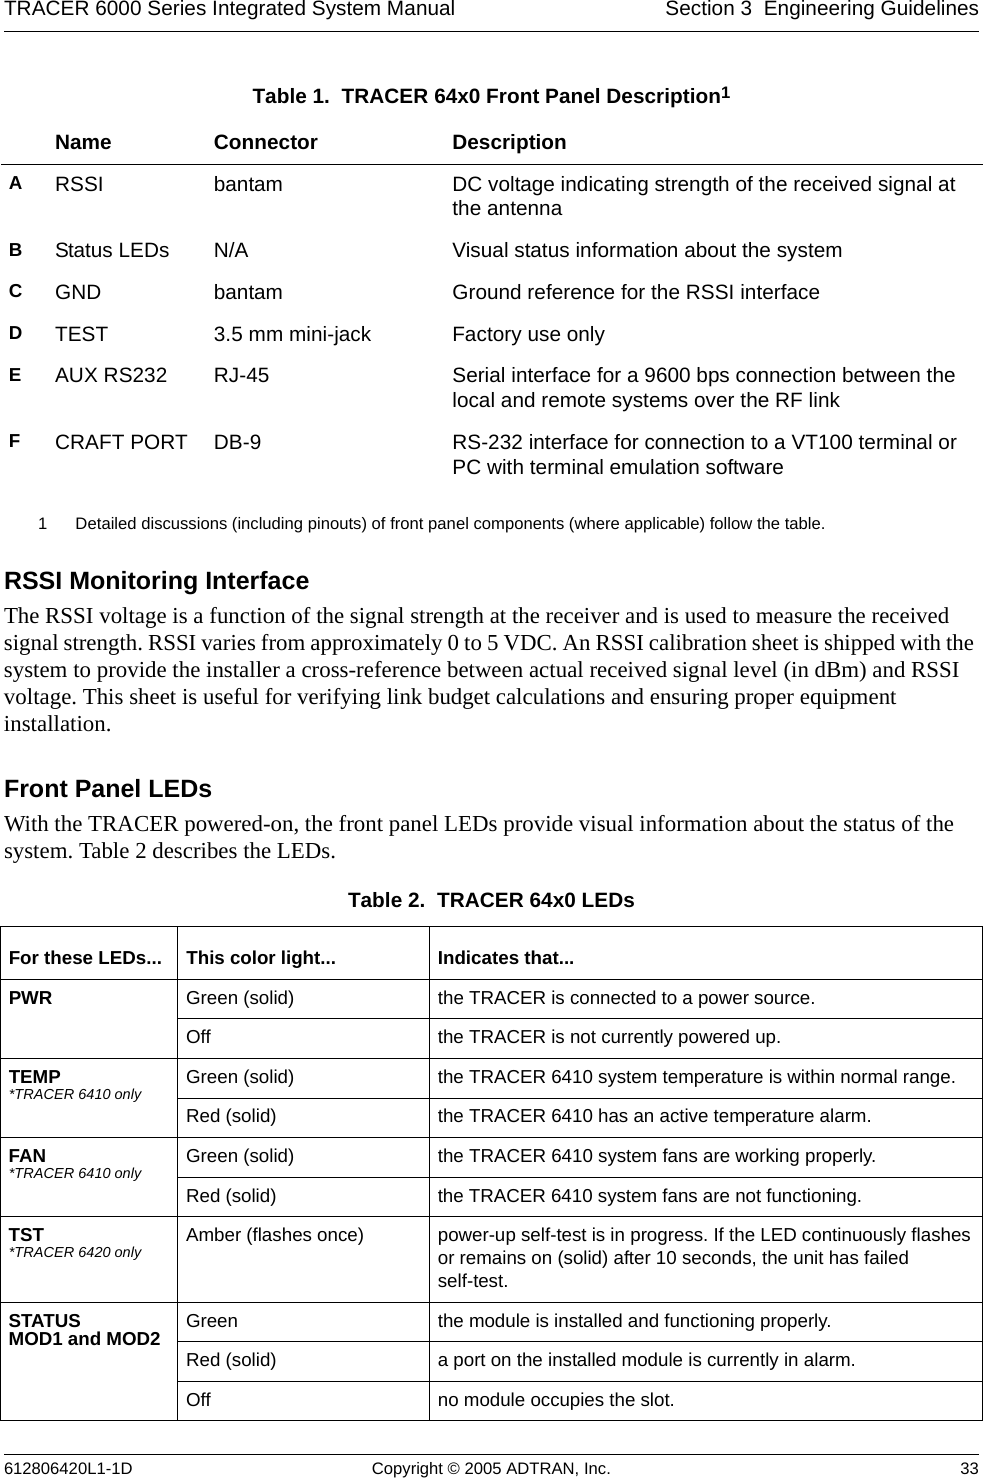 TRACER 6000 Series Integrated System Manual Section 3  Engineering Guidelines612806420L1-1D Copyright © 2005 ADTRAN, Inc. 33RSSI Monitoring InterfaceThe RSSI voltage is a function of the signal strength at the receiver and is used to measure the received signal strength. RSSI varies from approximately 0 to 5 VDC. An RSSI calibration sheet is shipped with the system to provide the installer a cross-reference between actual received signal level (in dBm) and RSSI voltage. This sheet is useful for verifying link budget calculations and ensuring proper equipment installation.Front Panel LEDsWith the TRACER powered-on, the front panel LEDs provide visual information about the status of the system. Table 2 describes the LEDs.Table 1.  TRACER 64x0 Front Panel Description1 1 Detailed discussions (including pinouts) of front panel components (where applicable) follow the table.Name Connector DescriptionARSSI bantam DC voltage indicating strength of the received signal at the antennaBStatus LEDs N/A Visual status information about the systemCGND bantam Ground reference for the RSSI interfaceDTEST 3.5 mm mini-jack Factory use onlyEAUX RS232 RJ-45 Serial interface for a 9600 bps connection between the local and remote systems over the RF linkFCRAFT PORT DB-9 RS-232 interface for connection to a VT100 terminal or PC with terminal emulation softwareTable 2.  TRACER 64x0 LEDs For these LEDs... This color light... Indicates that...PWR Green (solid) the TRACER is connected to a power source.Off the TRACER is not currently powered up.TEMP *TRACER 6410 only Green (solid) the TRACER 6410 system temperature is within normal range.Red (solid) the TRACER 6410 has an active temperature alarm.FAN *TRACER 6410 only Green (solid) the TRACER 6410 system fans are working properly.Red (solid) the TRACER 6410 system fans are not functioning.TST *TRACER 6420 only Amber (flashes once) power-up self-test is in progress. If the LED continuously flashesor remains on (solid) after 10 seconds, the unit has failedself-test.STATUS MOD1 and MOD2 Green  the module is installed and functioning properly.Red (solid) a port on the installed module is currently in alarm.Off no module occupies the slot.